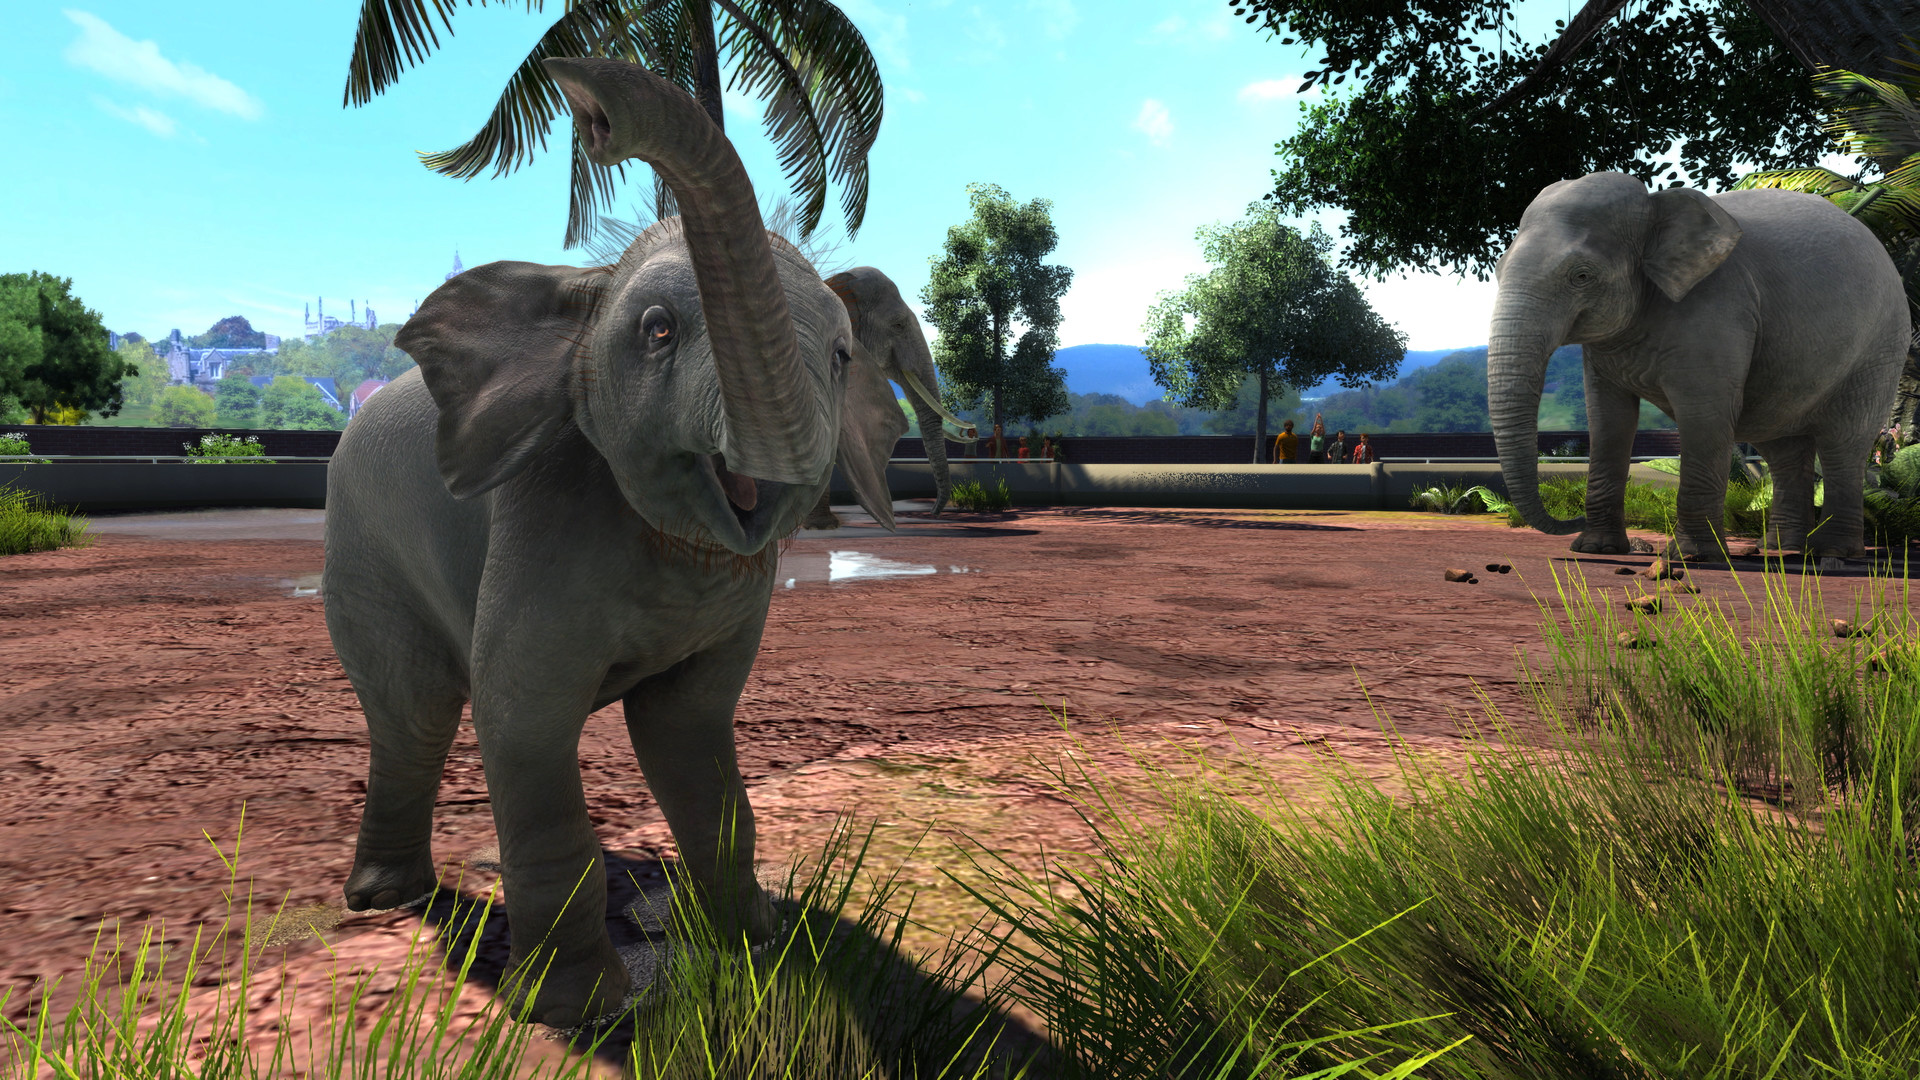 zoo tycoon for mac steam